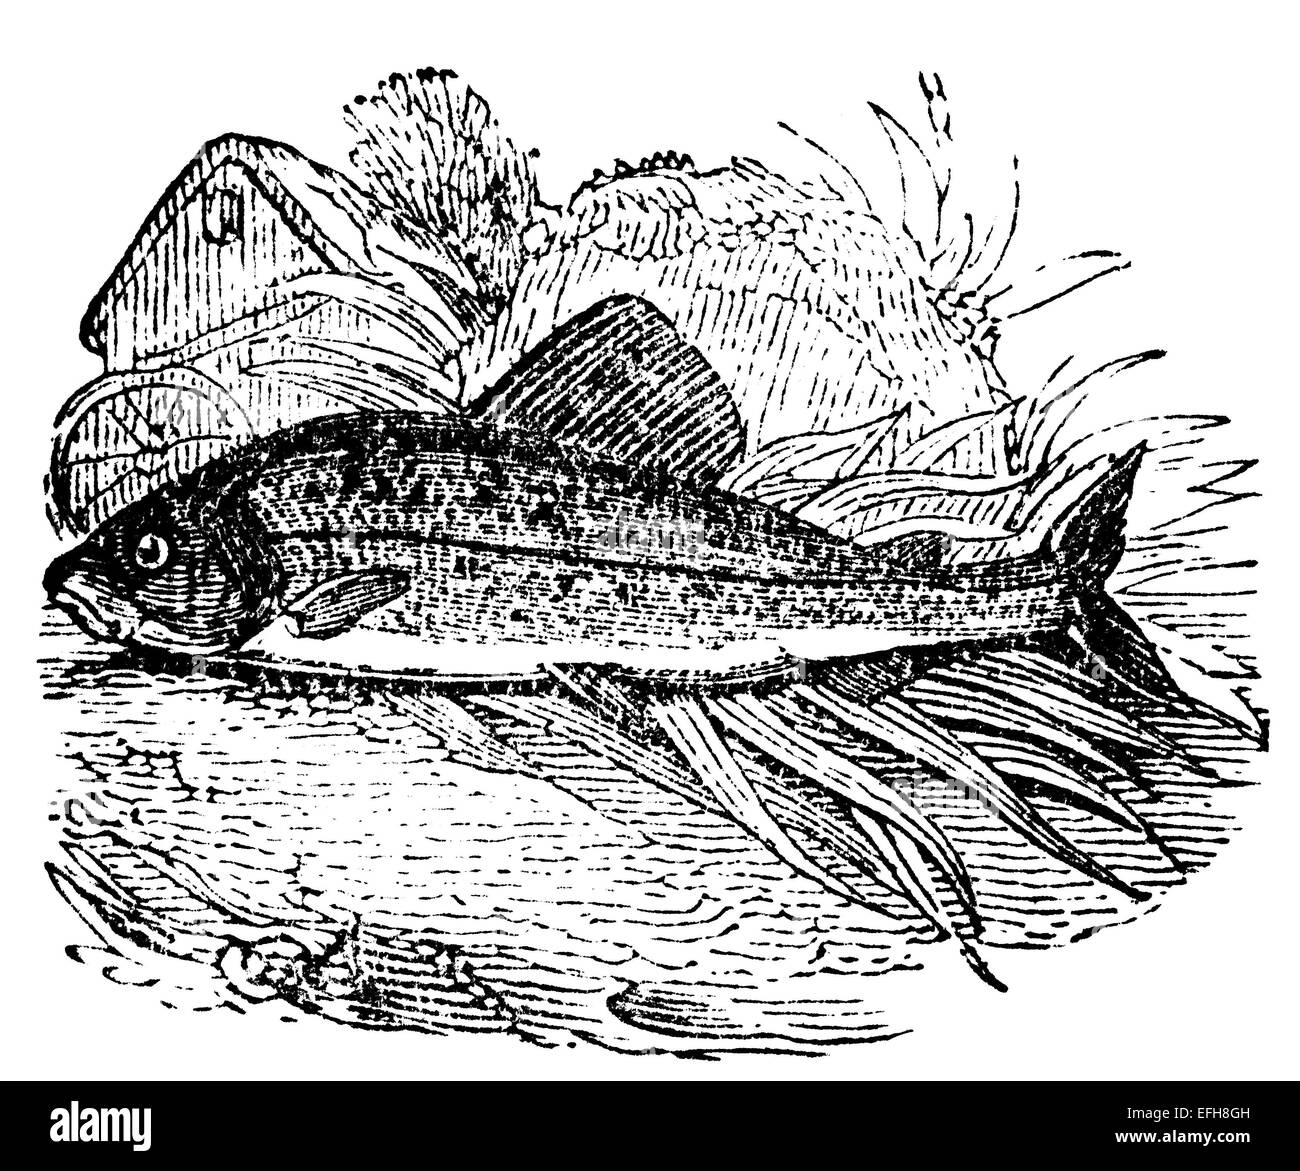 Victorian engraving of a grayling salmon. Digitally restored image from a mid-19th century Encyclopaedia. Stock Photo